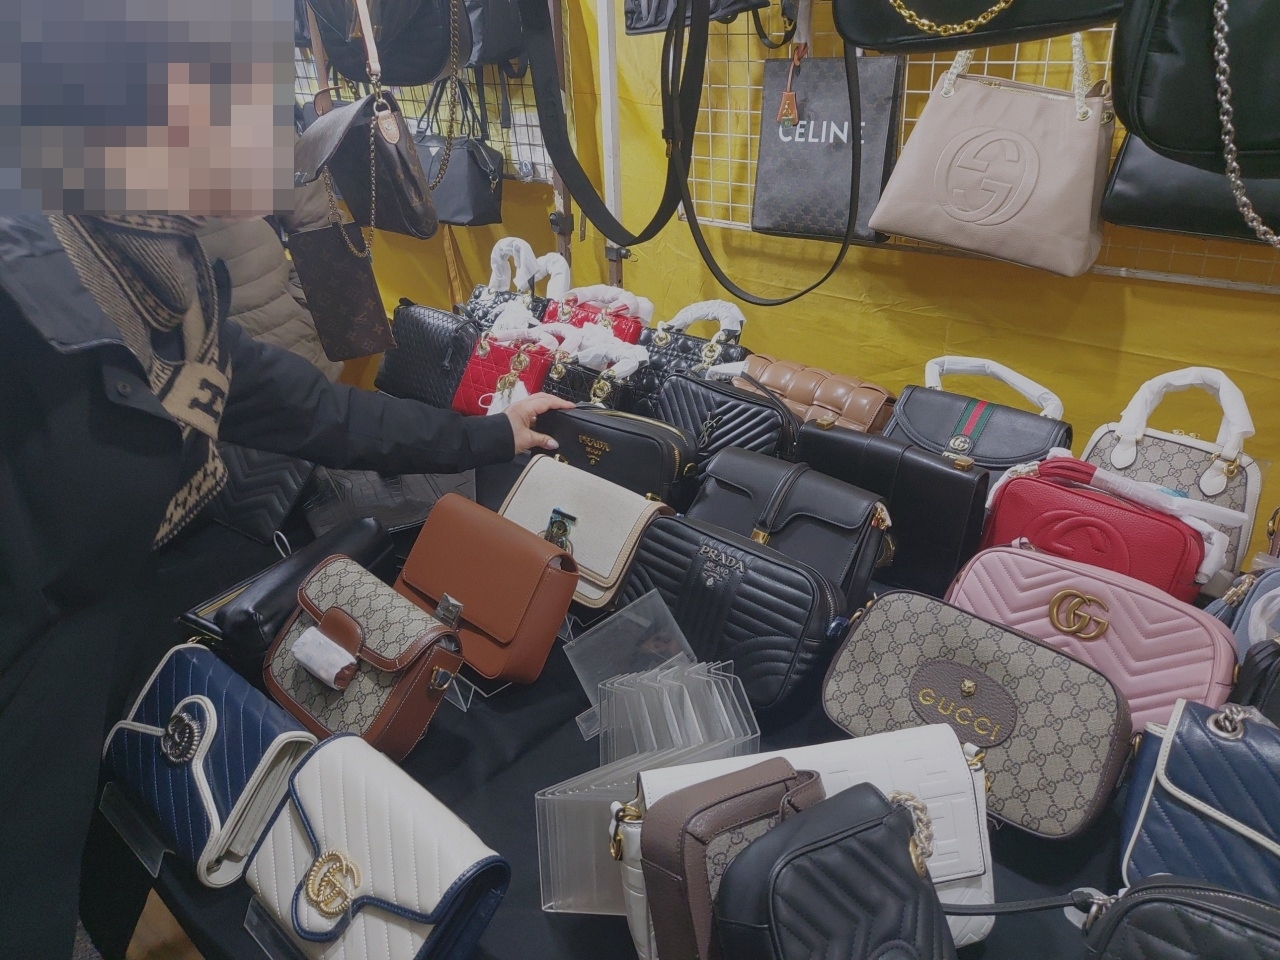 From Gucci to Louis Vuitton, New York's fake luxury goods highlight a  rising counterfeit market